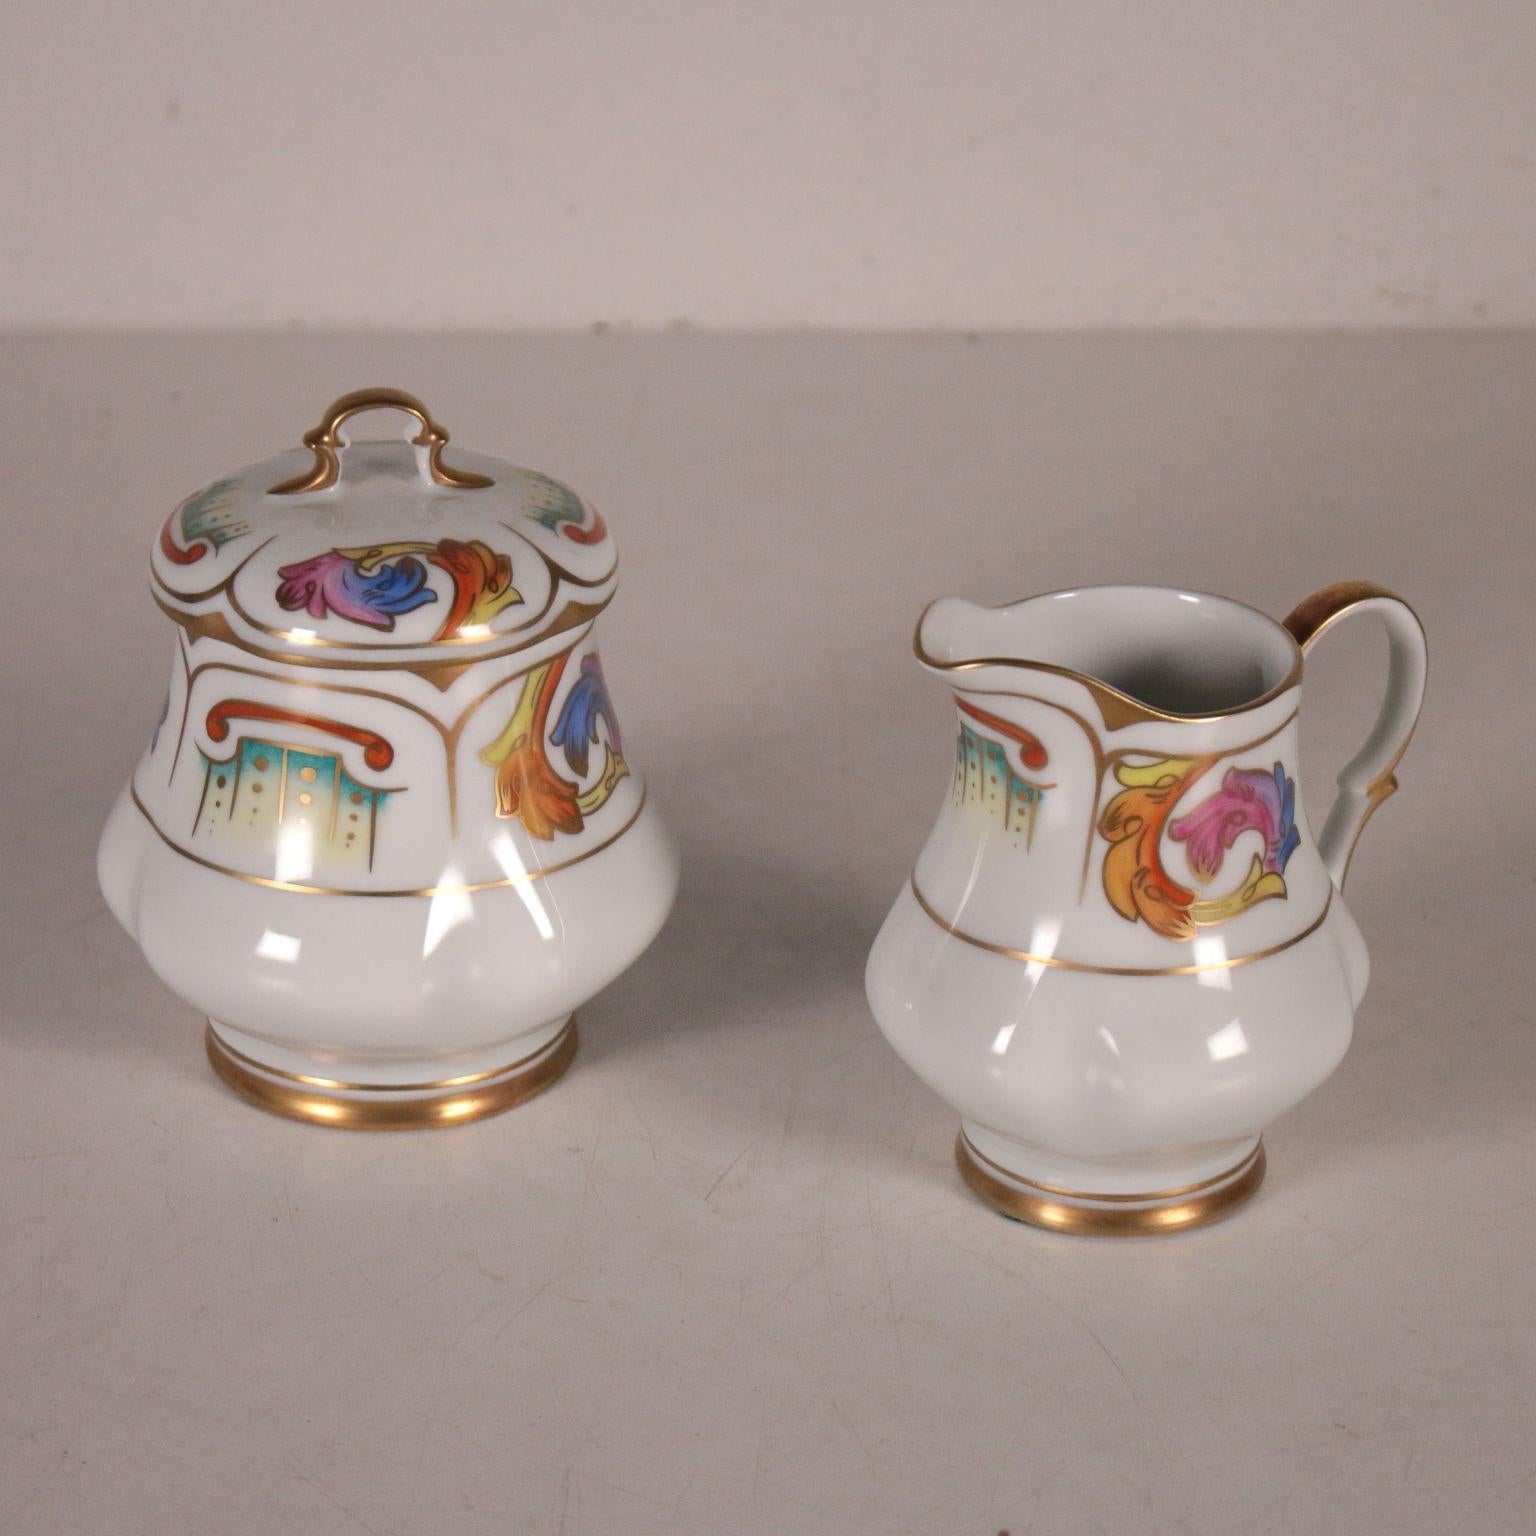 French Limoges Dishes, Tea, Coffee Service, Porcelain, France, 20th Century